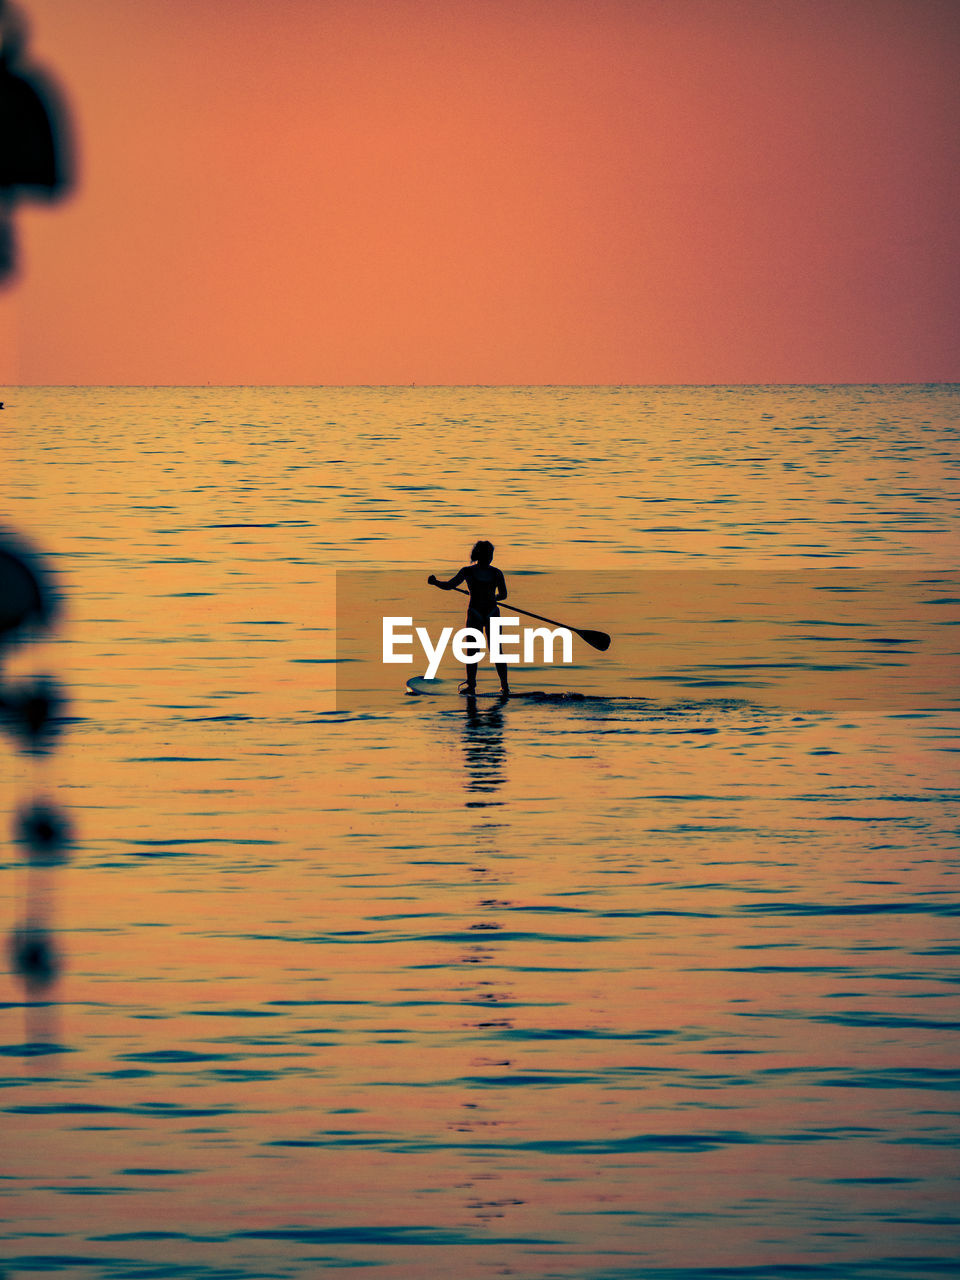 Silhouette woman standing on paddleboard during sunset